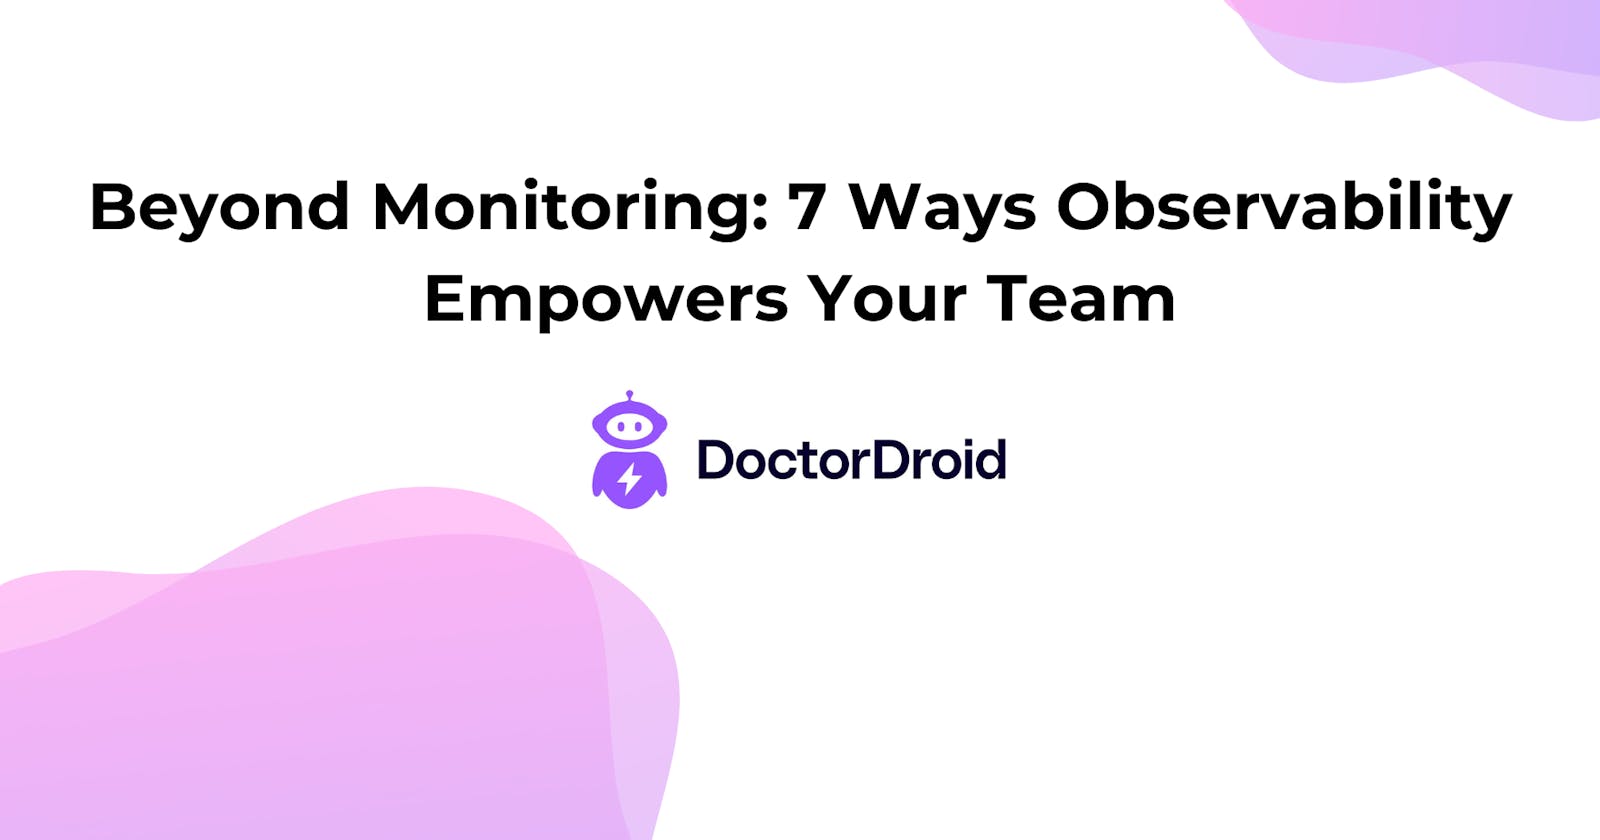 Beyond Monitoring: 7 Ways Observability Empowers Your Team